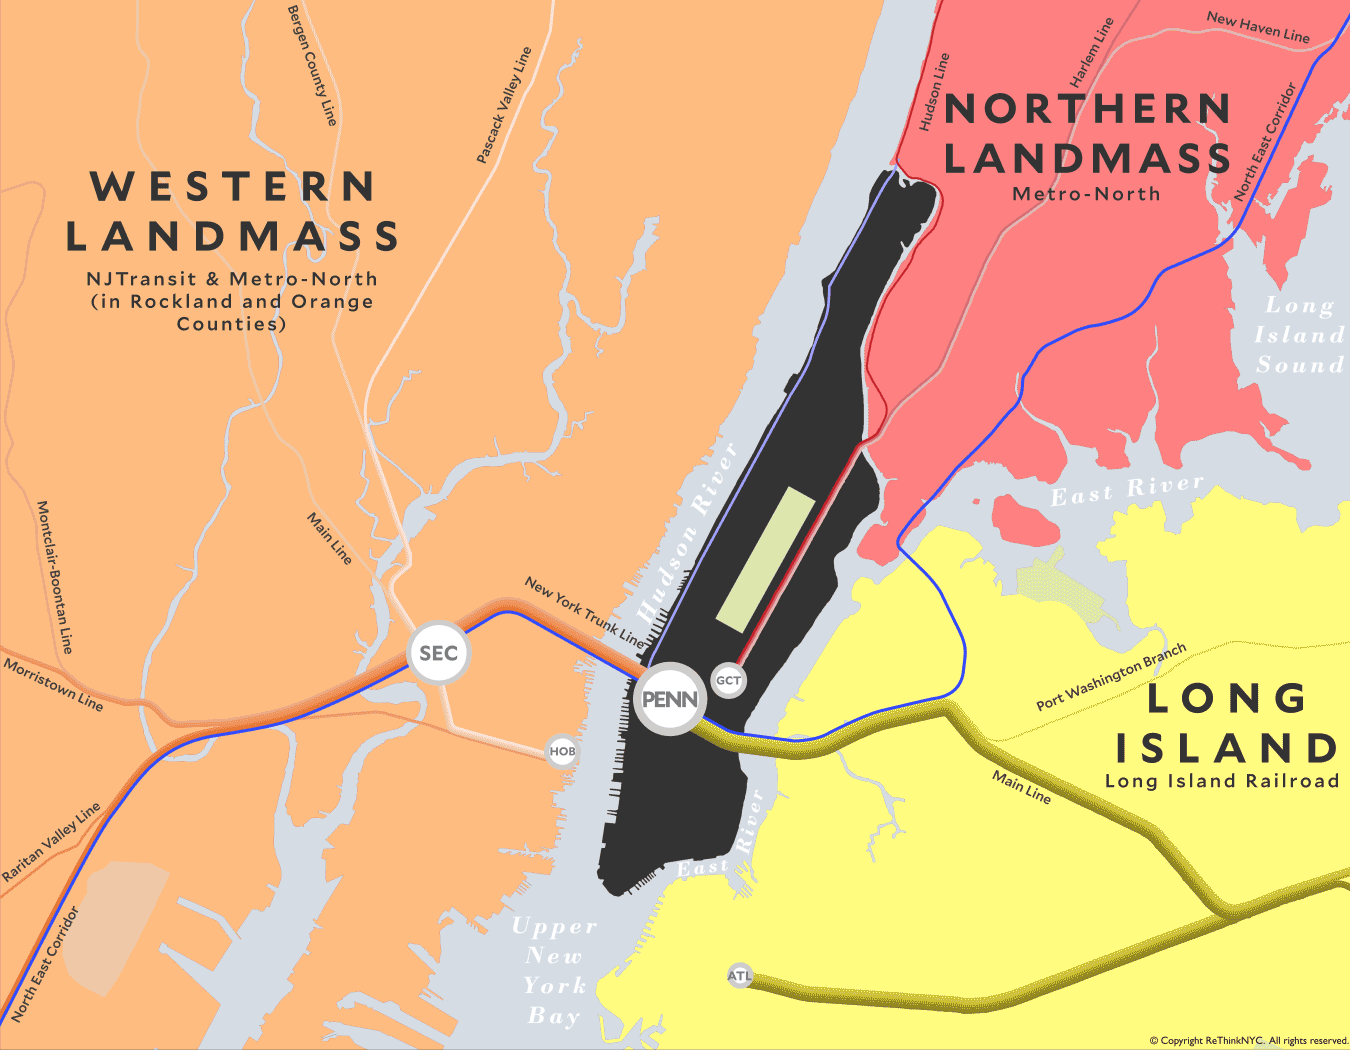 ReThinkNYC Rail Unification Proposal (before)